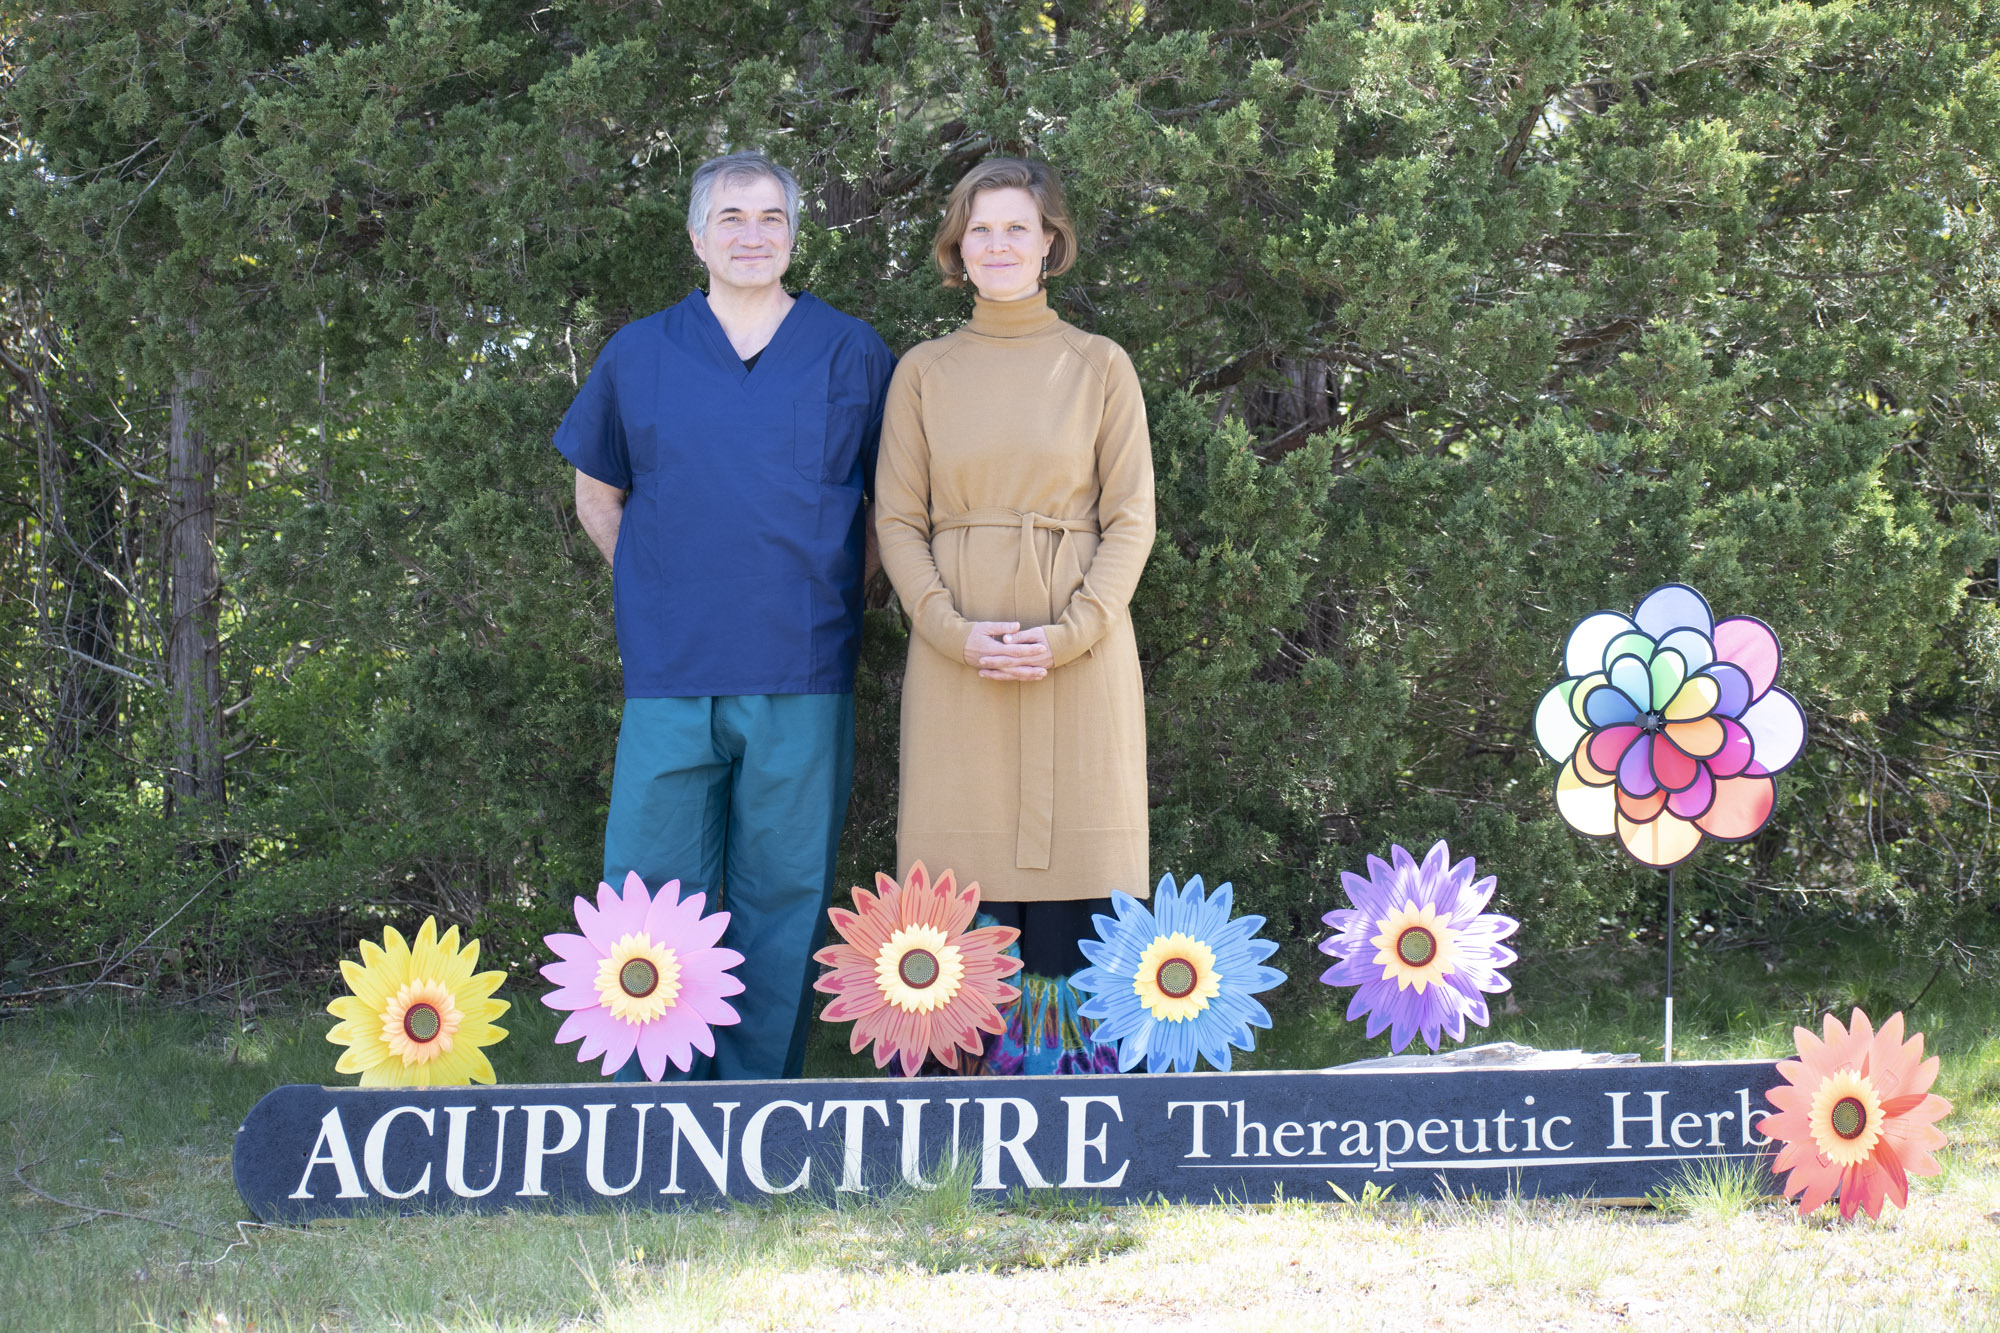 Acupuncture & Herbs on 6A 990 Main St #2, West Barnstable Massachusetts 02668